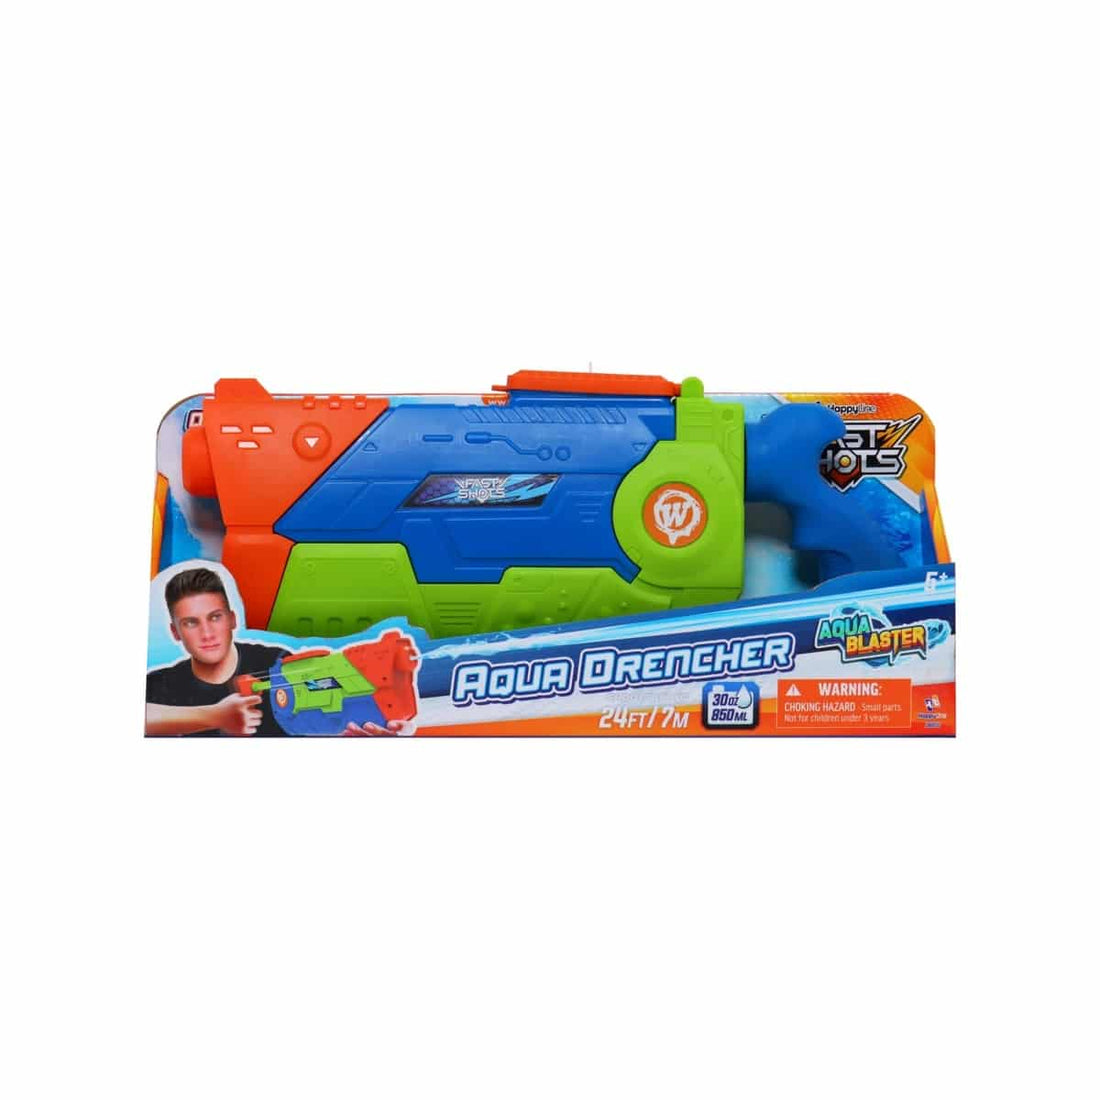 Fast Shots Water Blaster Aqua Drencher Up To 7M With Tank 850Ml